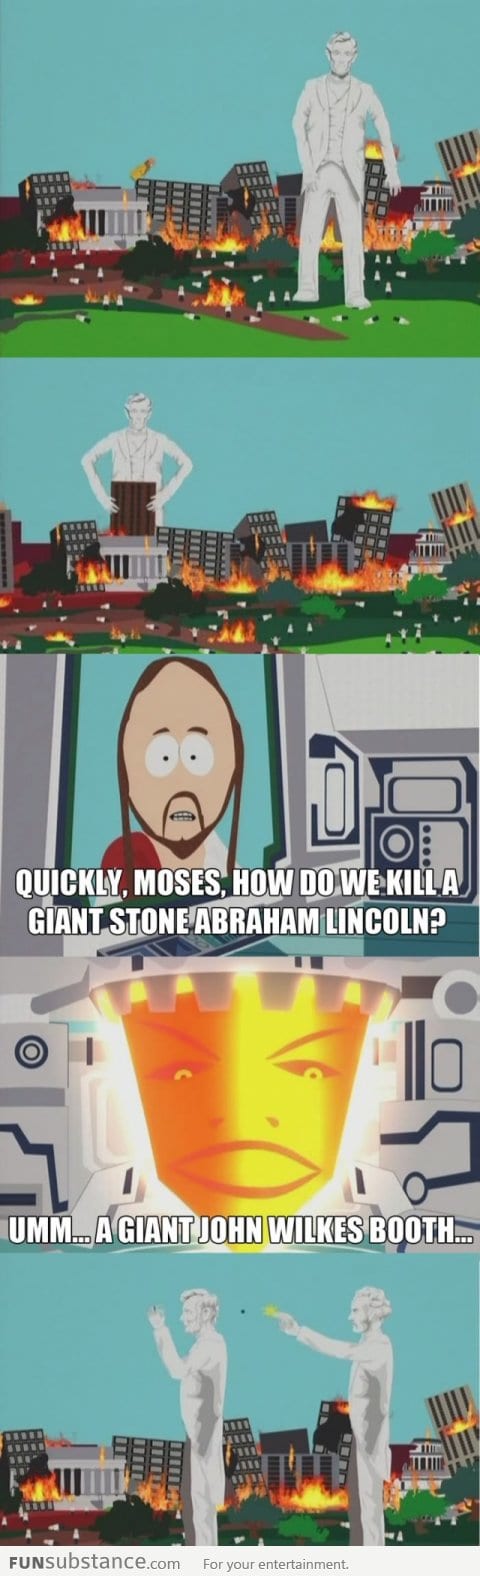 South Park Logic is great!